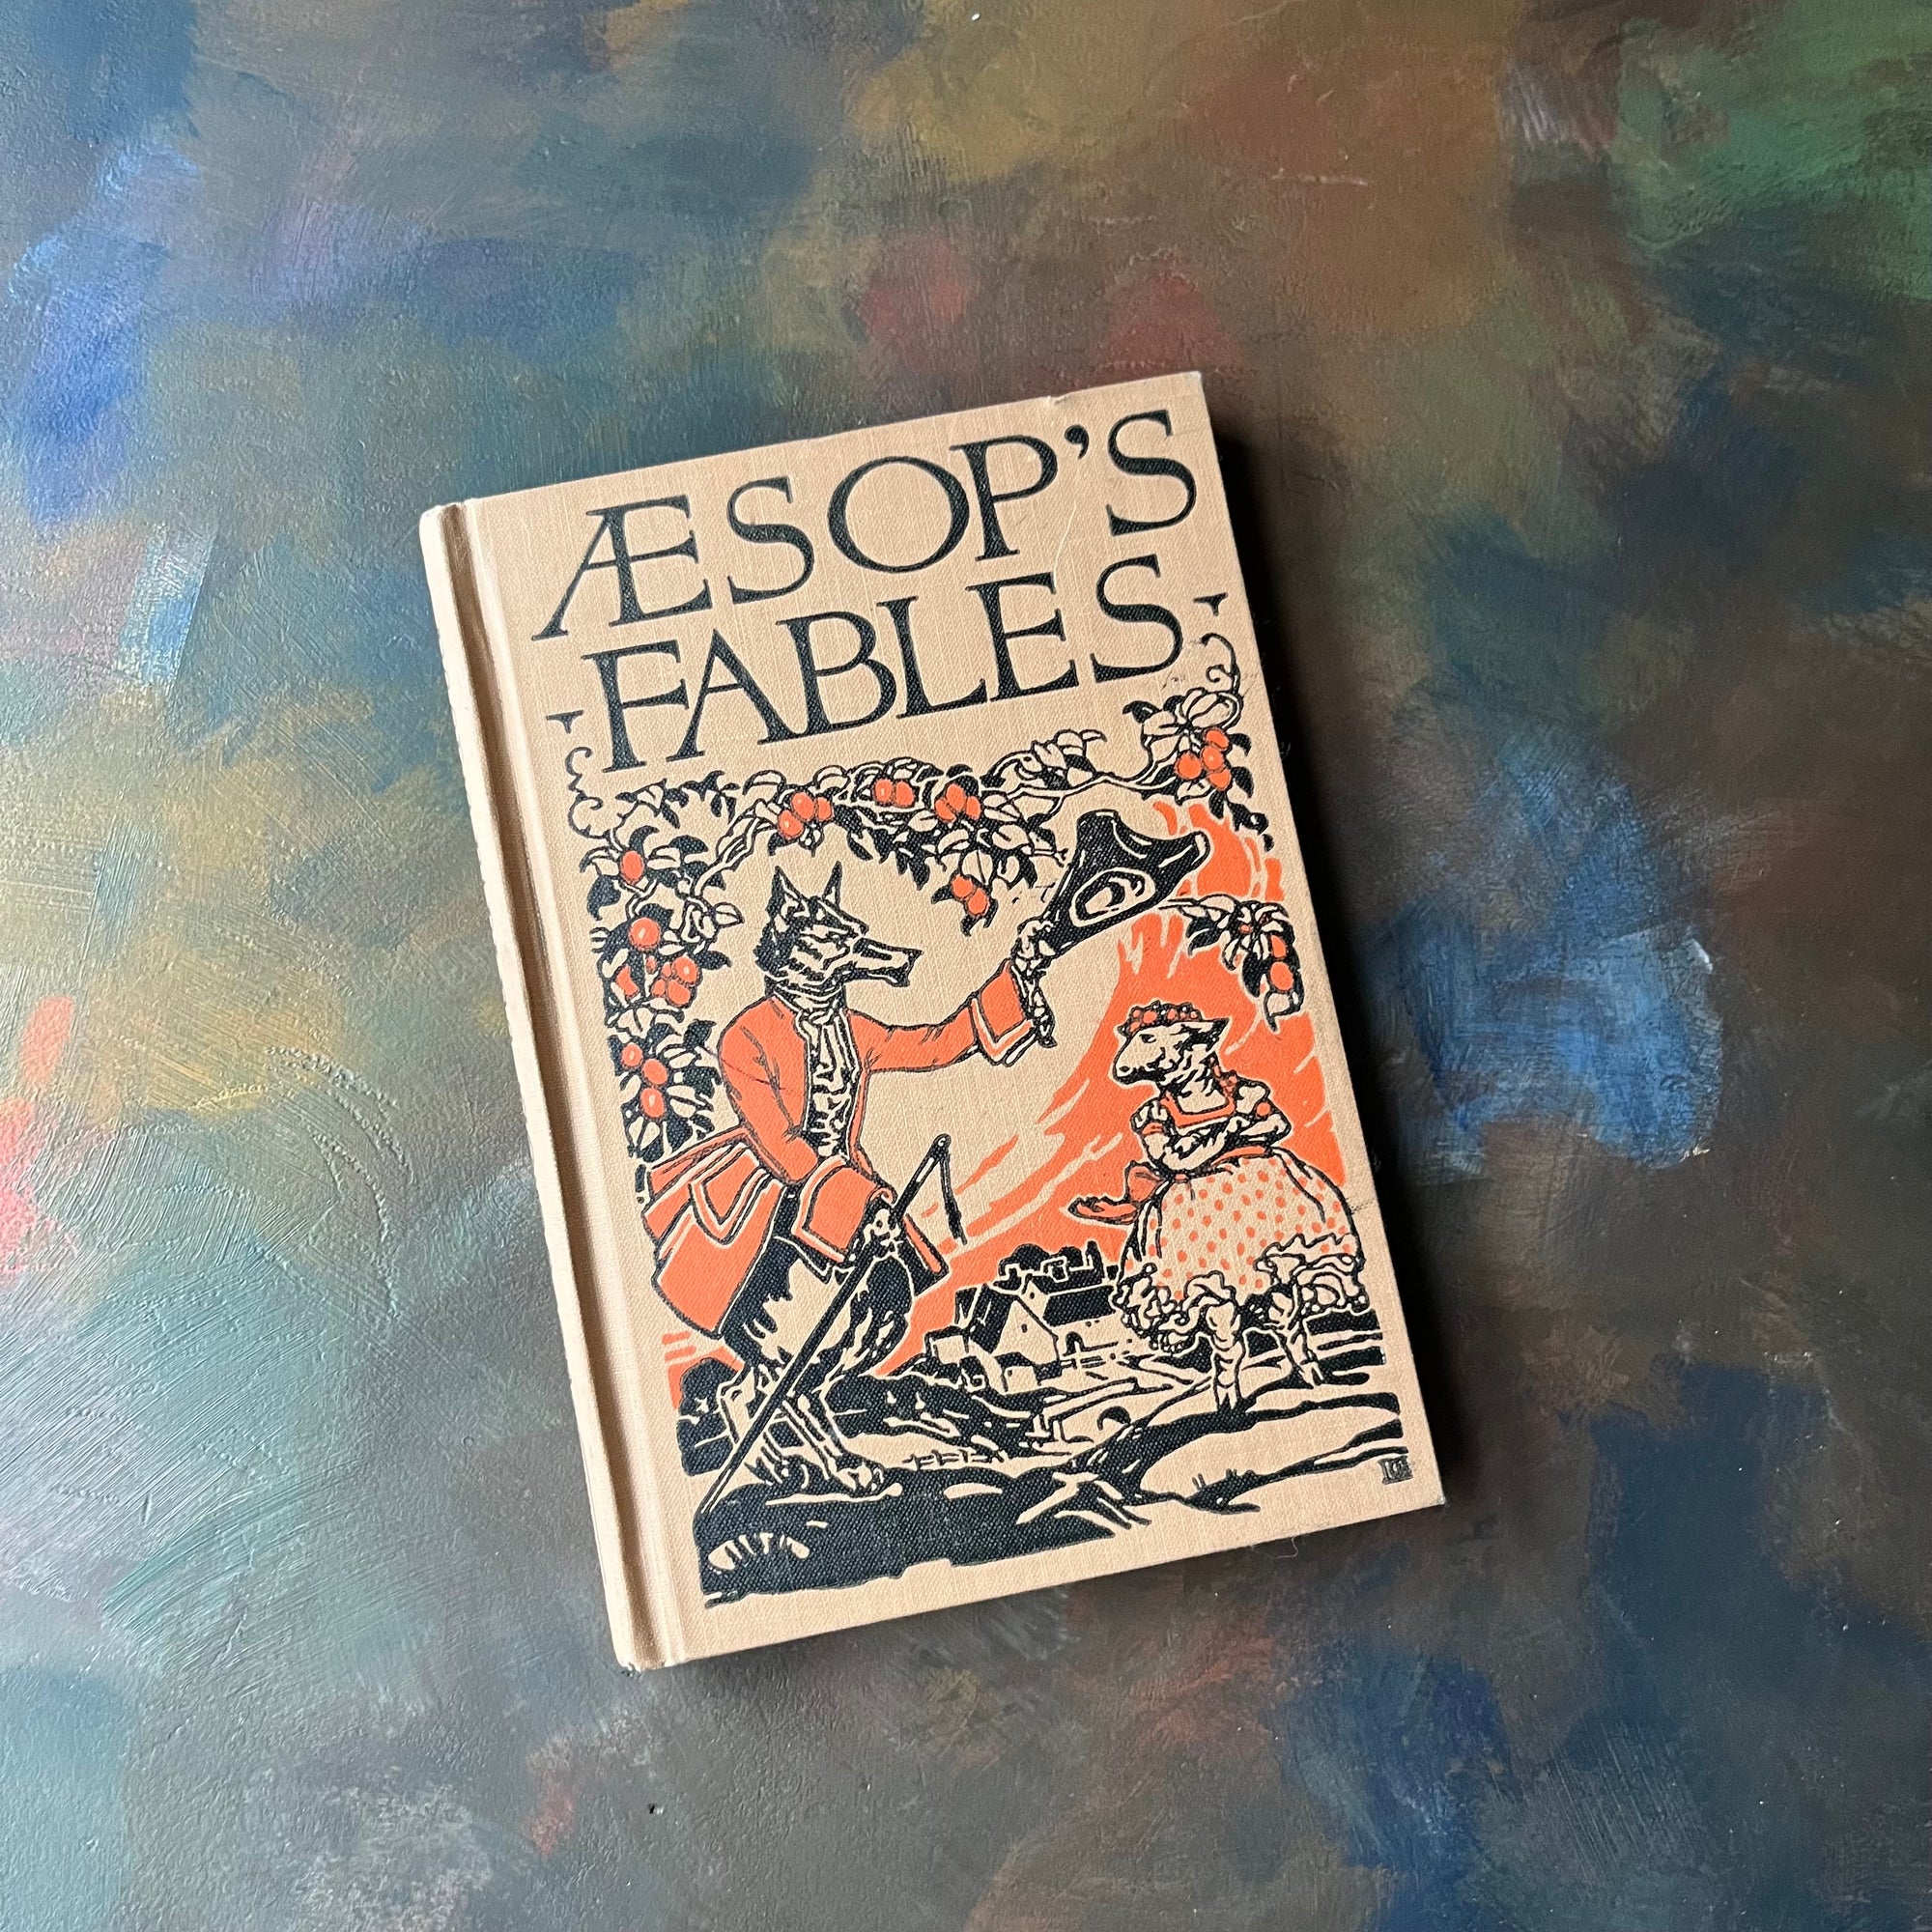 Aesop's Fables-1928 The John C. Winston Company Edition-vintage fairy tales & folk lore-view of the front cover with an illustration of a fox greeting a sheep in orange & black